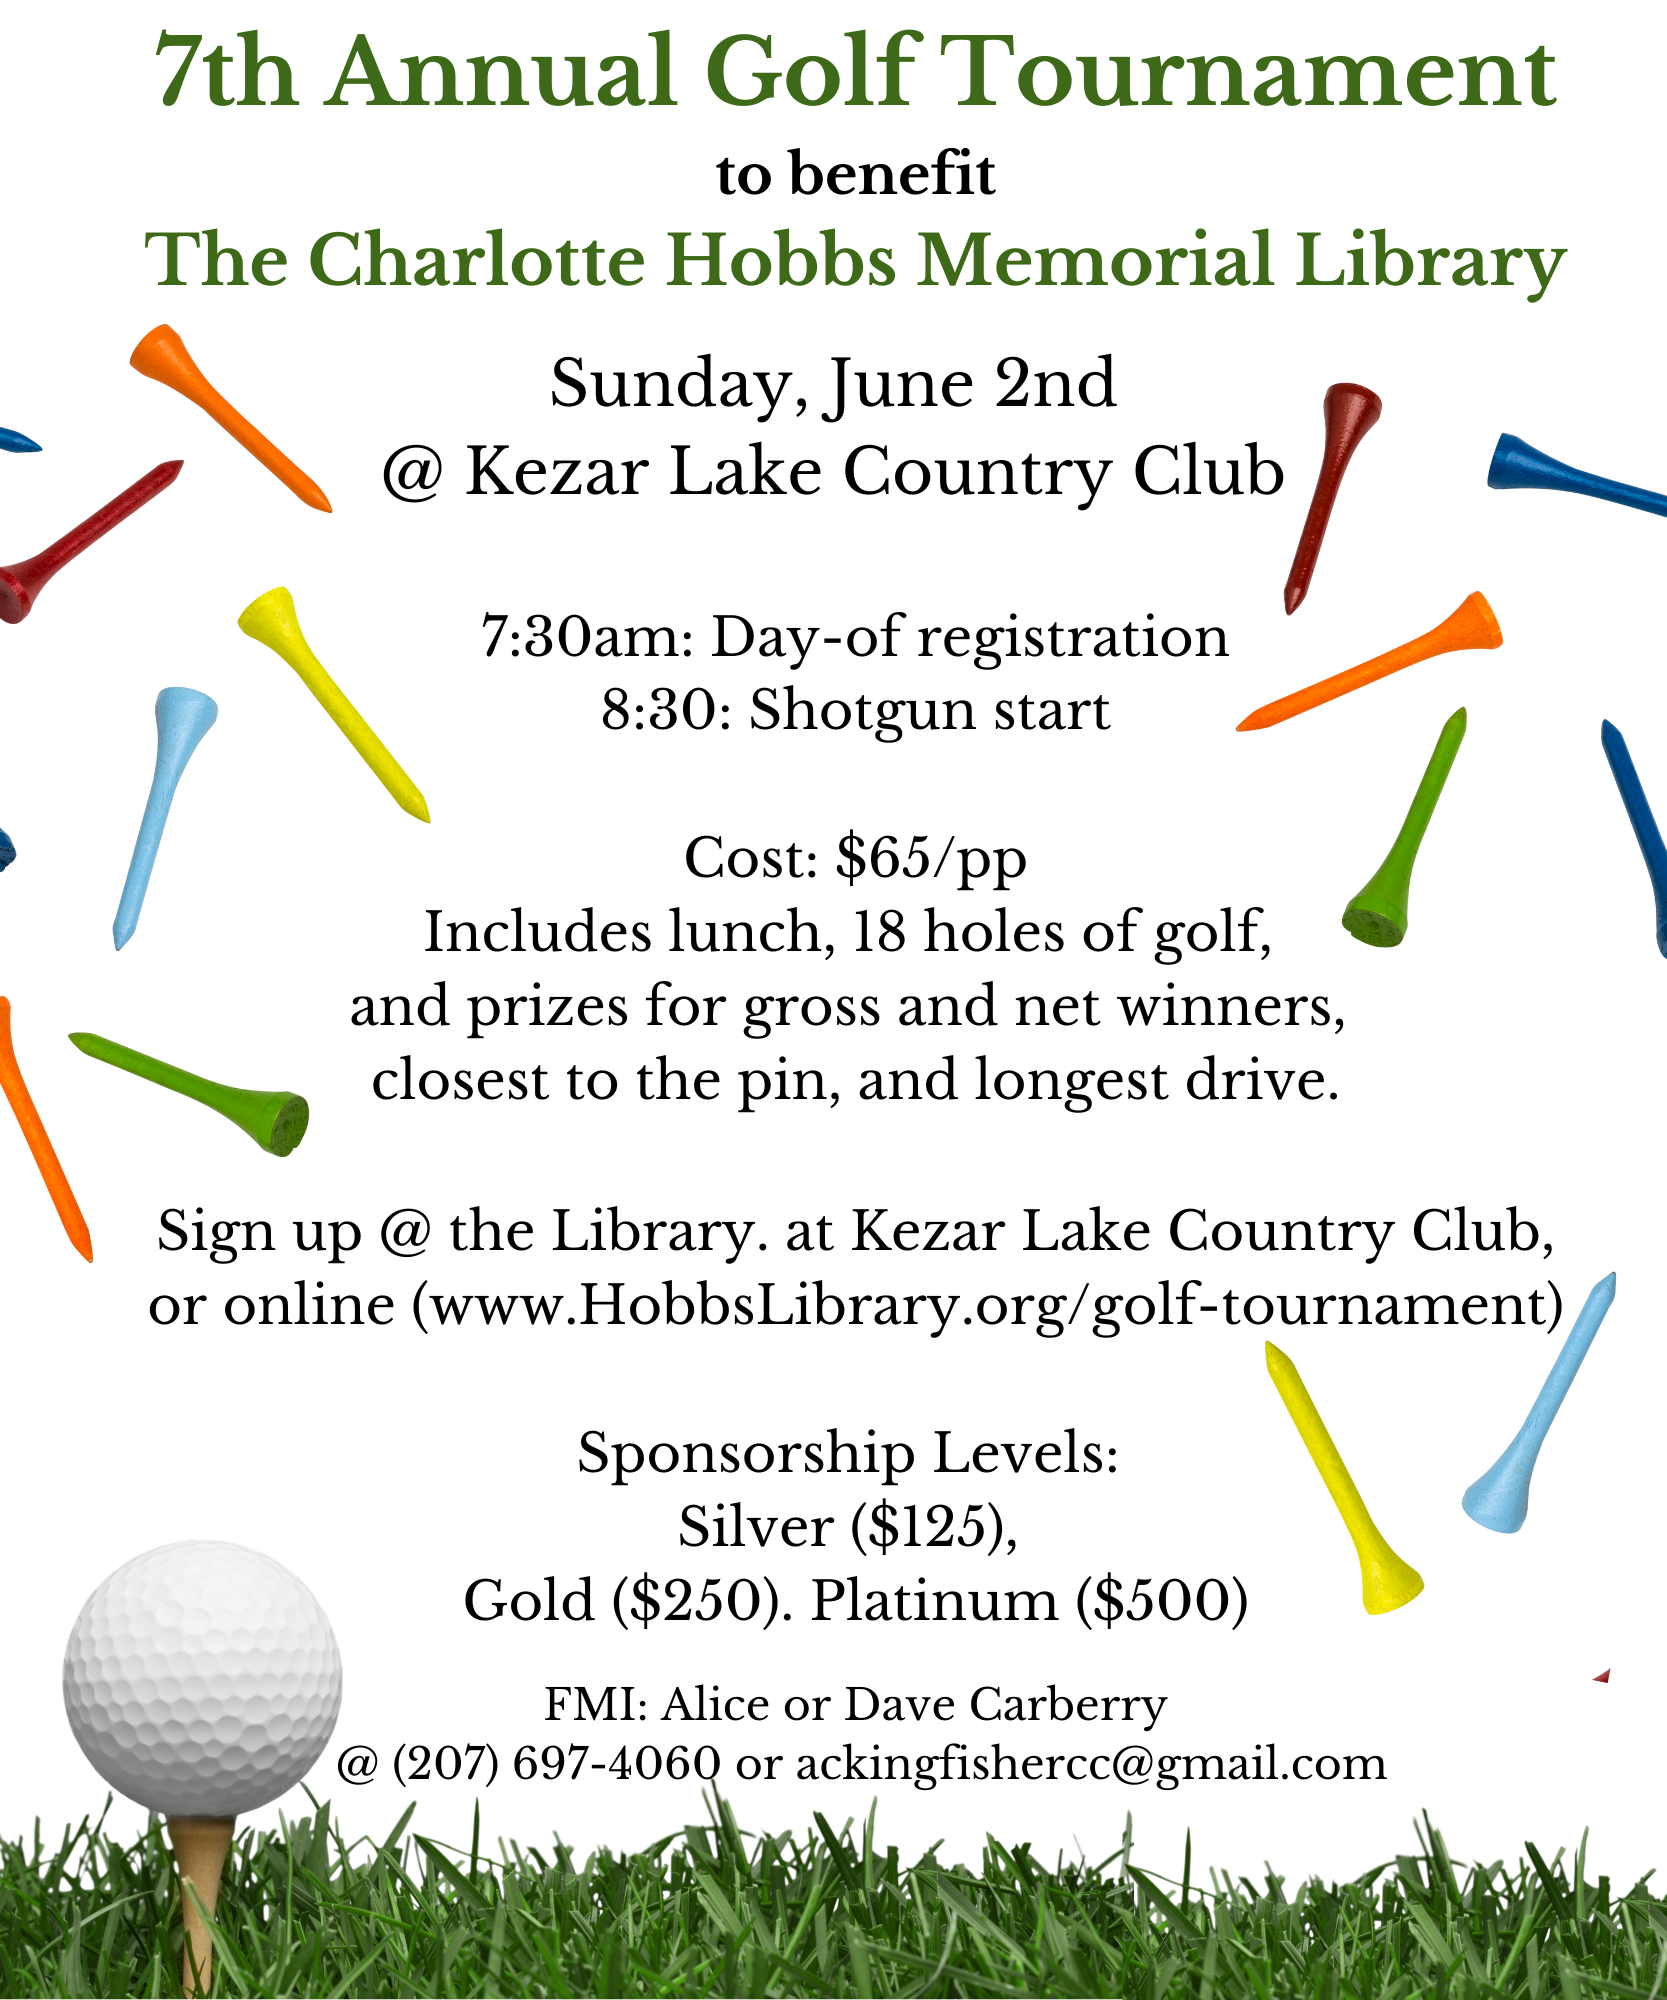 7th Annual Golf Tournament to benefit The Charlotte Hobbs Memorial Library (12.5 x 15 in).png